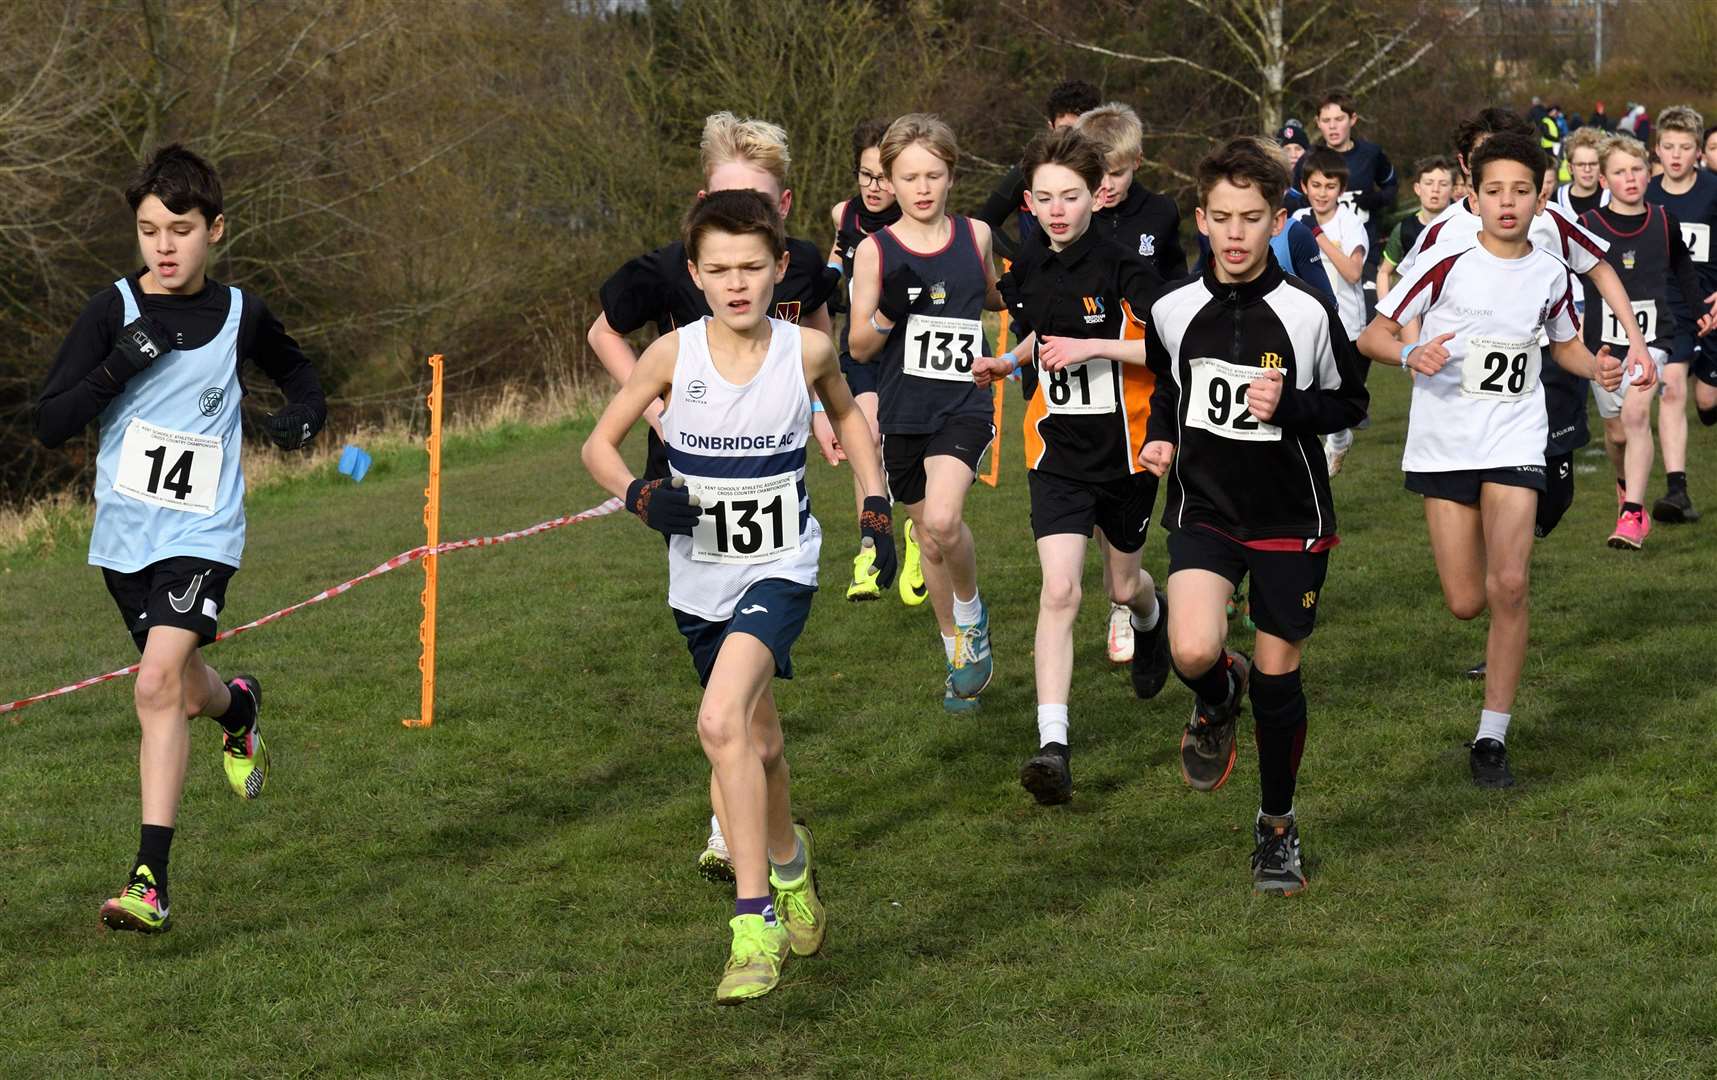 Sam Shearer flew the flag for Tonbridge in the Year 7 boys’ race. Picture: Simon Hildrew